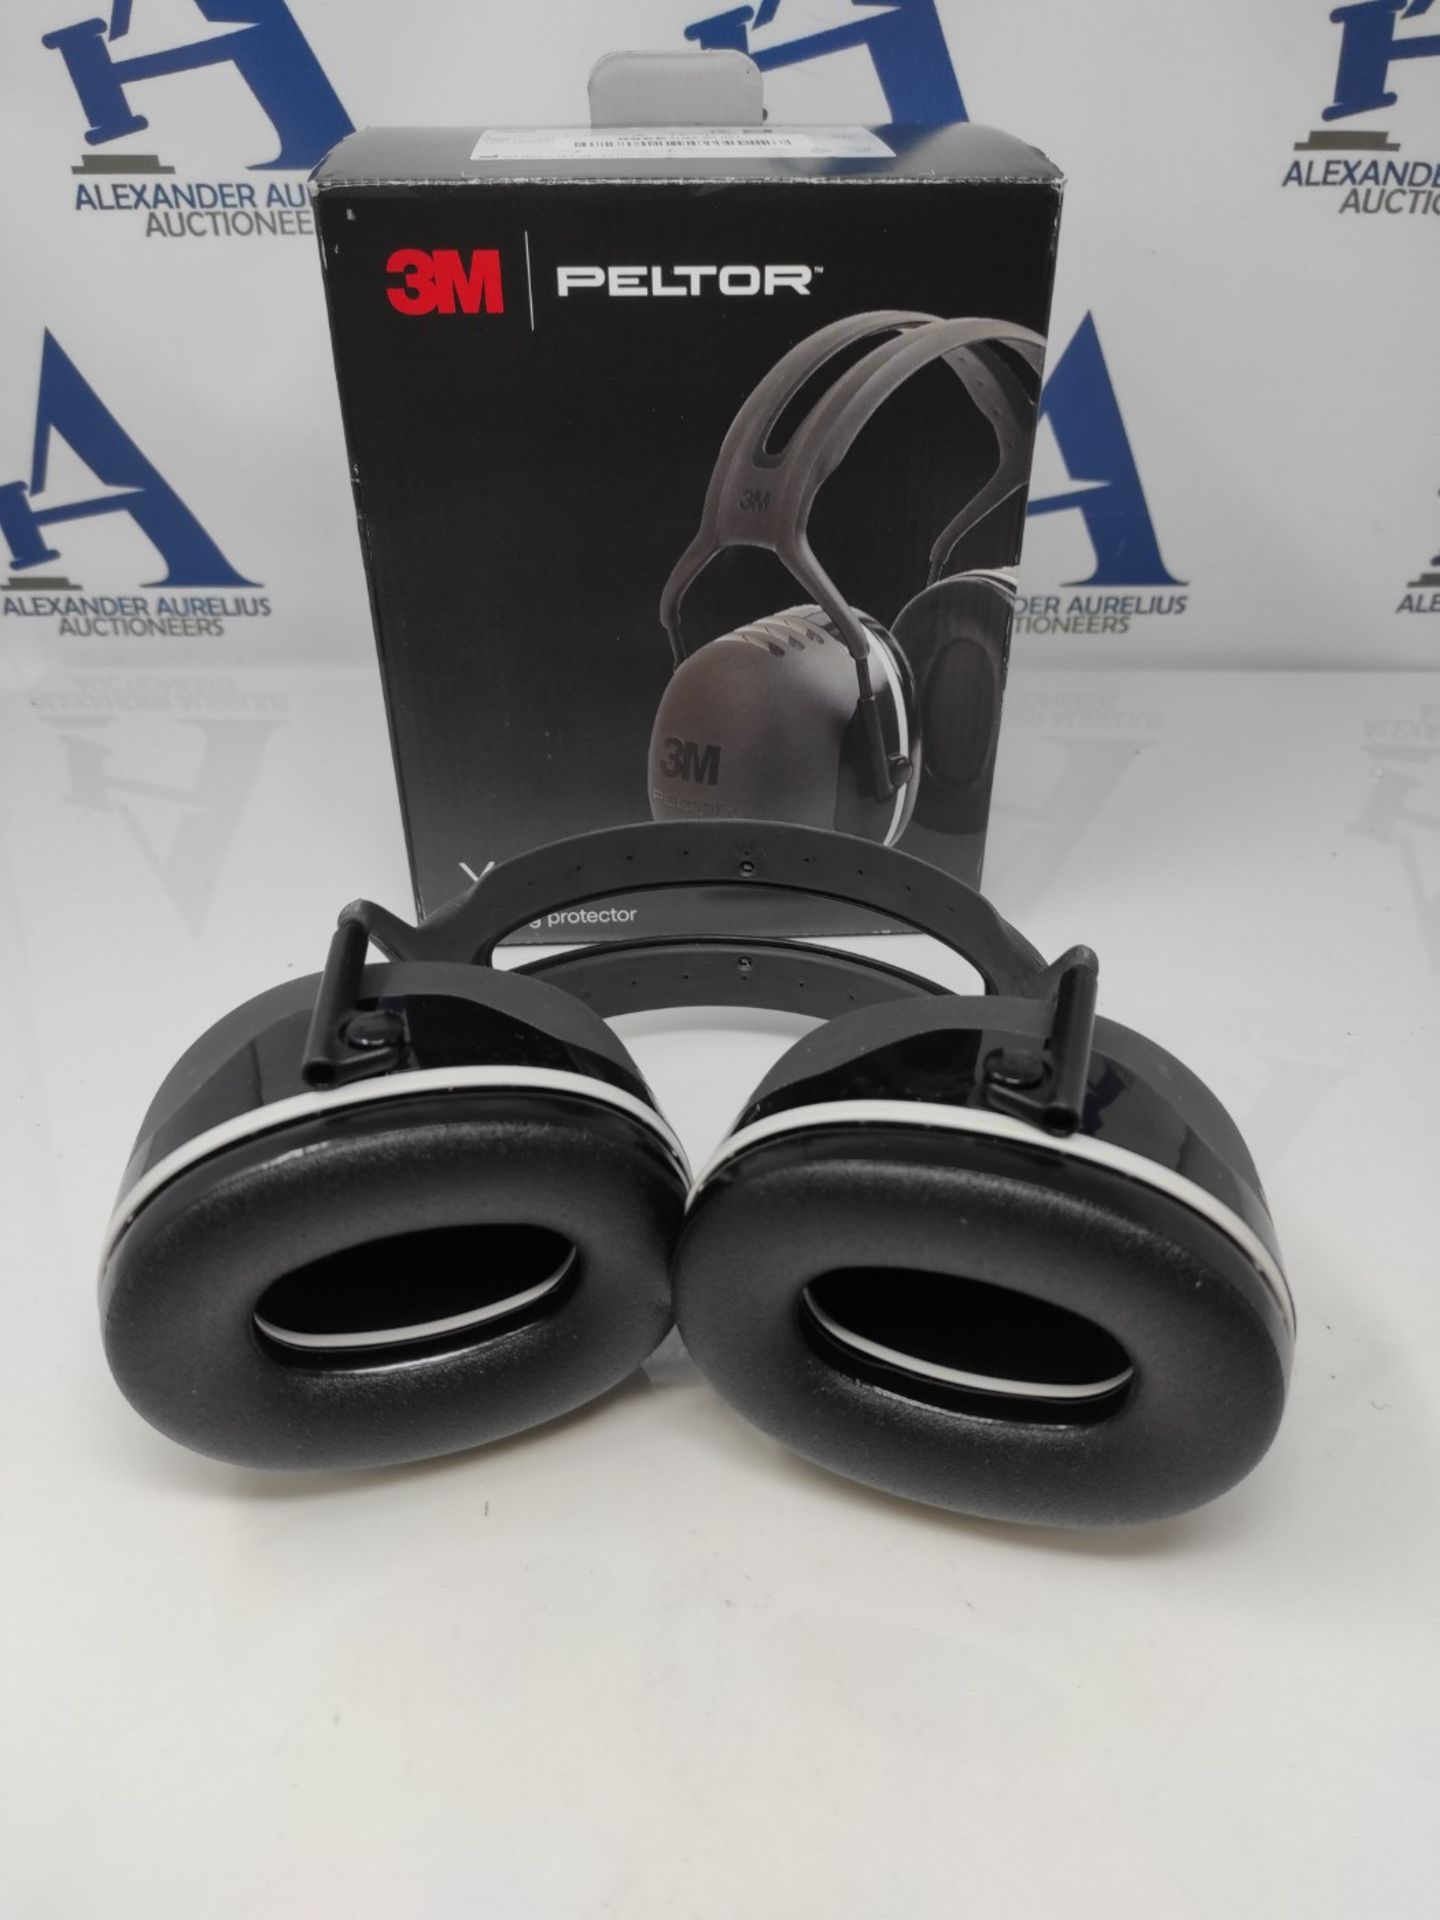 3M Peltor X5A Ear Defenders with Headband, Earmuffs for Reliable Hearing Protection Ag - Bild 2 aus 2